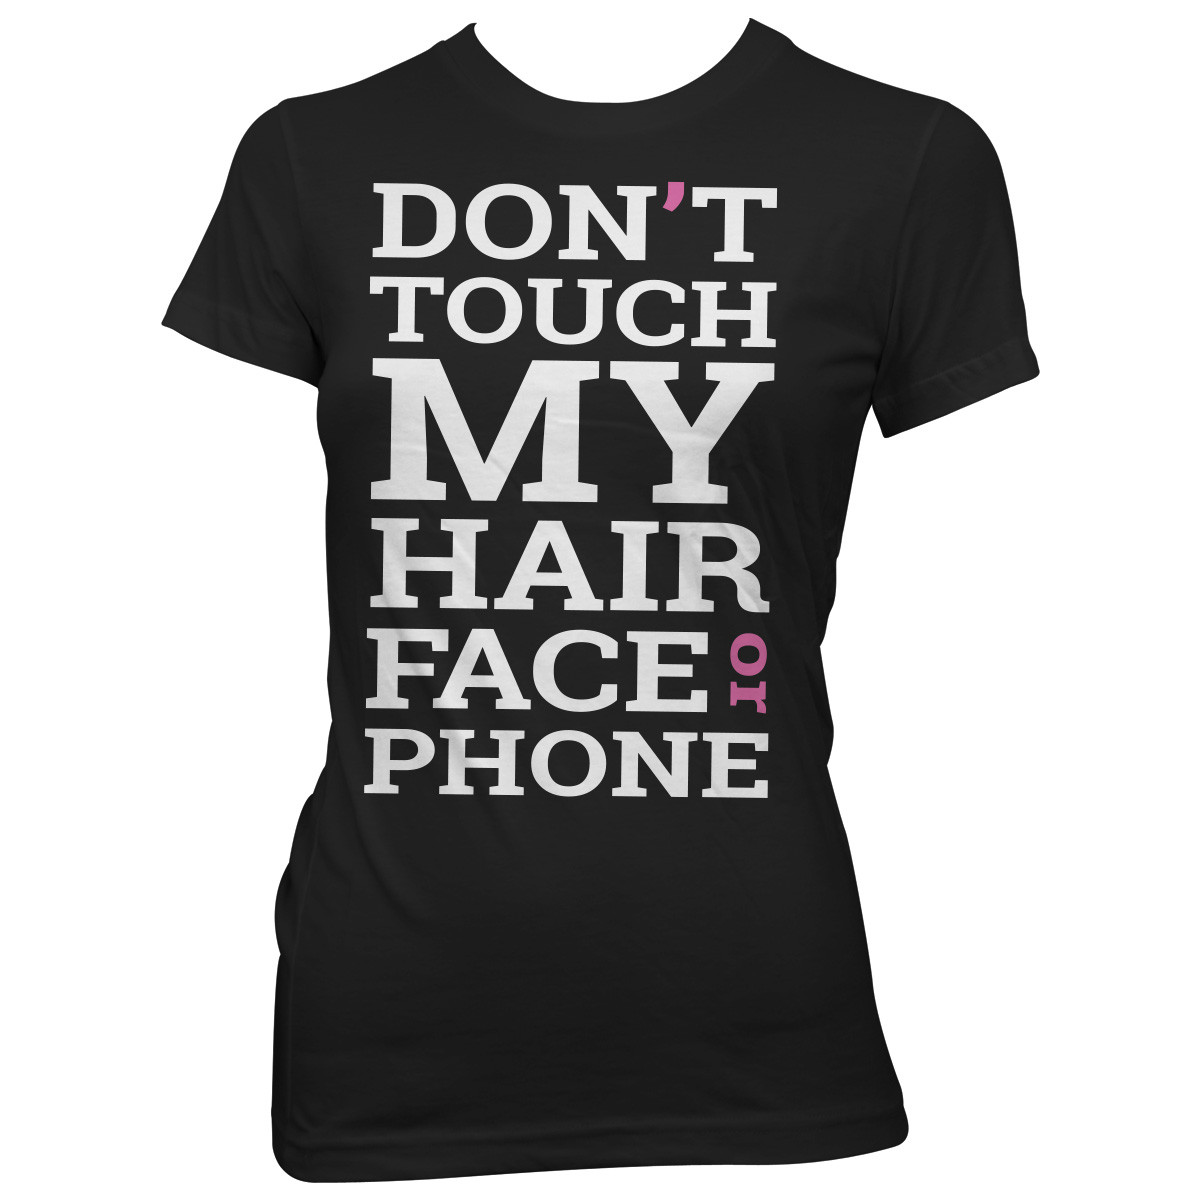 "Don't Touch My Hair, Face Or Phone" T-Shirt